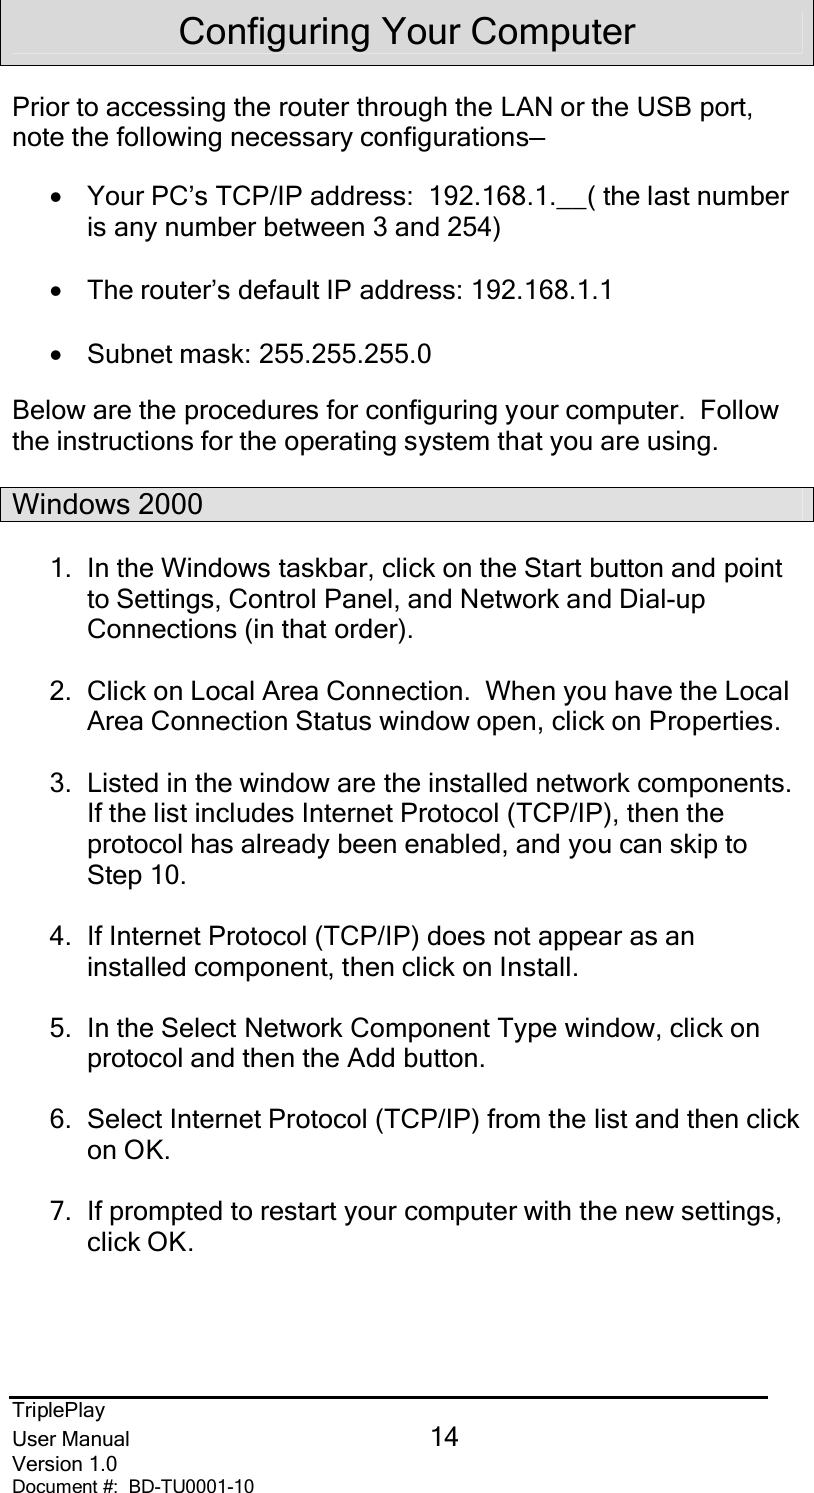 TriplePlayUser Manual 14Version 1.0Document #:  BD-TU0001-10Configuring Your ComputerPrior to accessing the router through the LAN or the USB port,note the following necessary configurations—•Your PC’s TCP/IP address:  192.168.1.__( the last numberis any number between 3 and 254)•The router’s default IP address: 192.168.1.1•Subnet mask: 255.255.255.0Below are the procedures for configuring your computer.  Followthe instructions for the operating system that you are using.Windows 20001.  In the Windows taskbar, click on the Start button and pointto Settings, Control Panel, and Network and Dial-upConnections (in that order).2.  Click on Local Area Connection.  When you have the LocalArea Connection Status window open, click on Properties.3.  Listed in the window are the installed network components.If the list includes Internet Protocol (TCP/IP), then theprotocol has already been enabled, and you can skip toStep 10.4.  If Internet Protocol (TCP/IP) does not appear as aninstalled component, then click on Install.5.  In the Select Network Component Type window, click onprotocol and then the Add button.6.  Select Internet Protocol (TCP/IP) from the list and then clickon OK.7.  If prompted to restart your computer with the new settings,click OK.